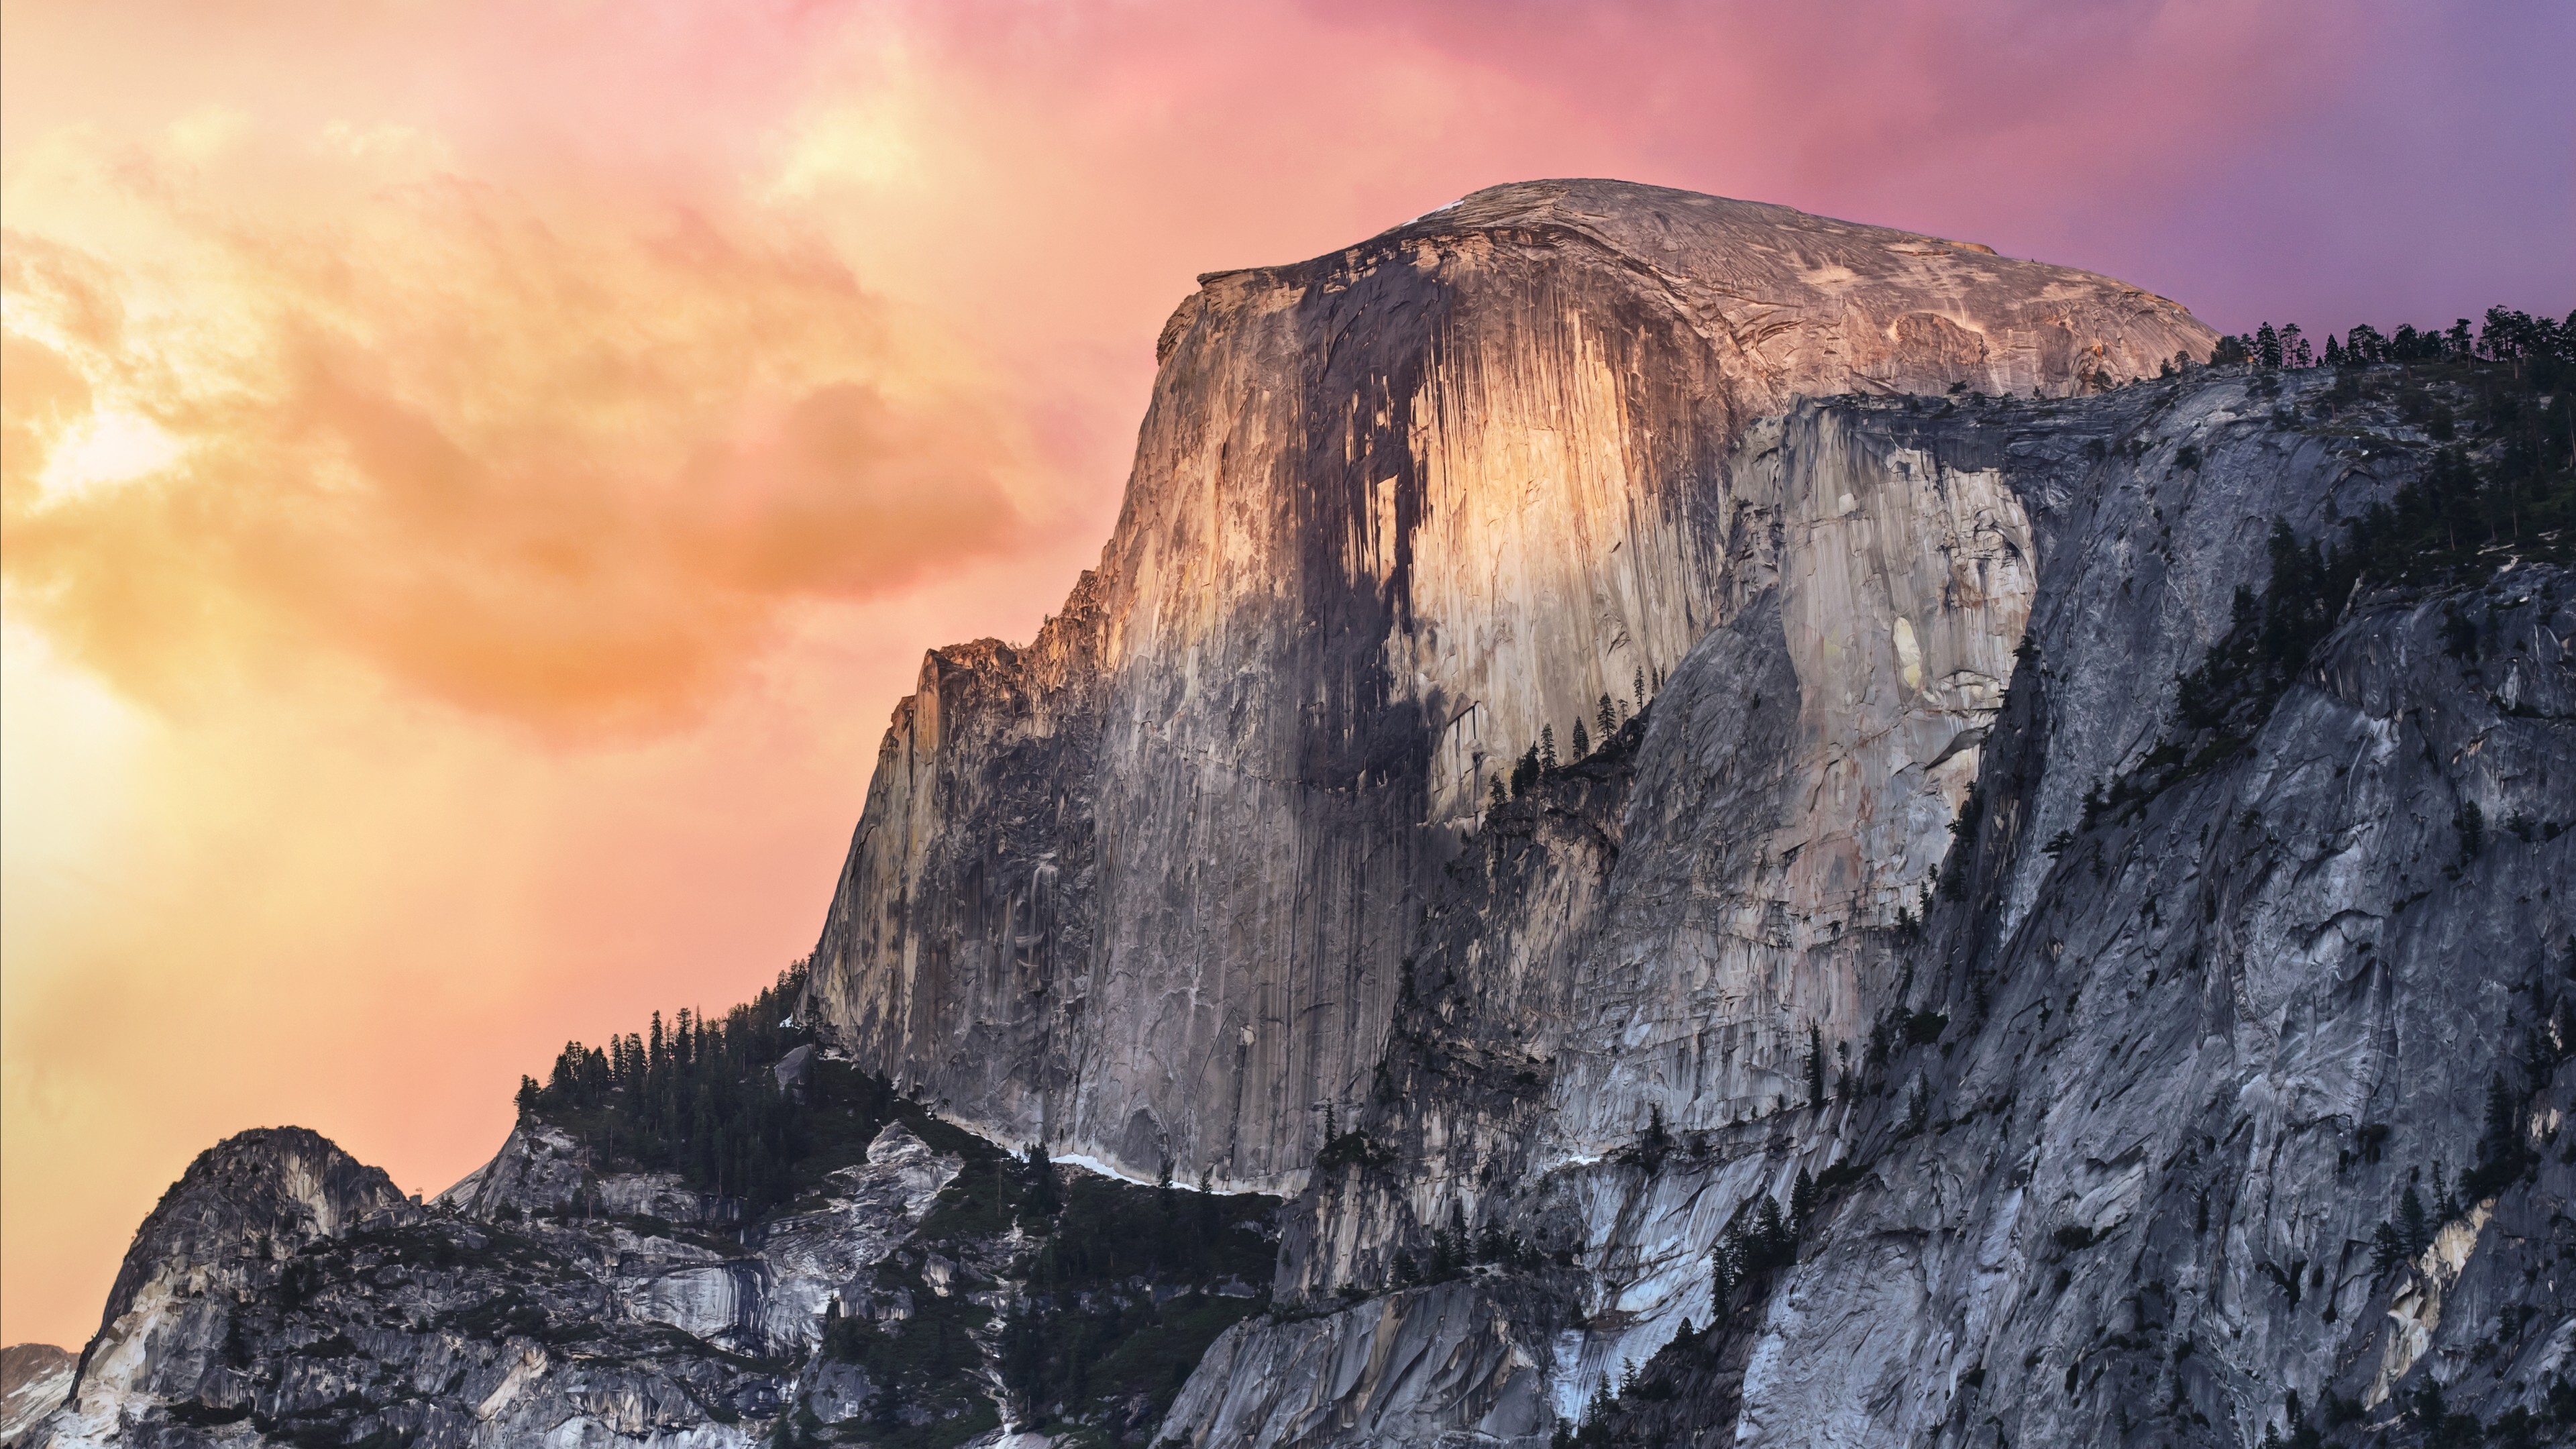 Geology: El Capitan, A vertical rock formation in Yosemite National Park, Forest, Mountains, Sunset, Nature. 3840x2160 4K Background.